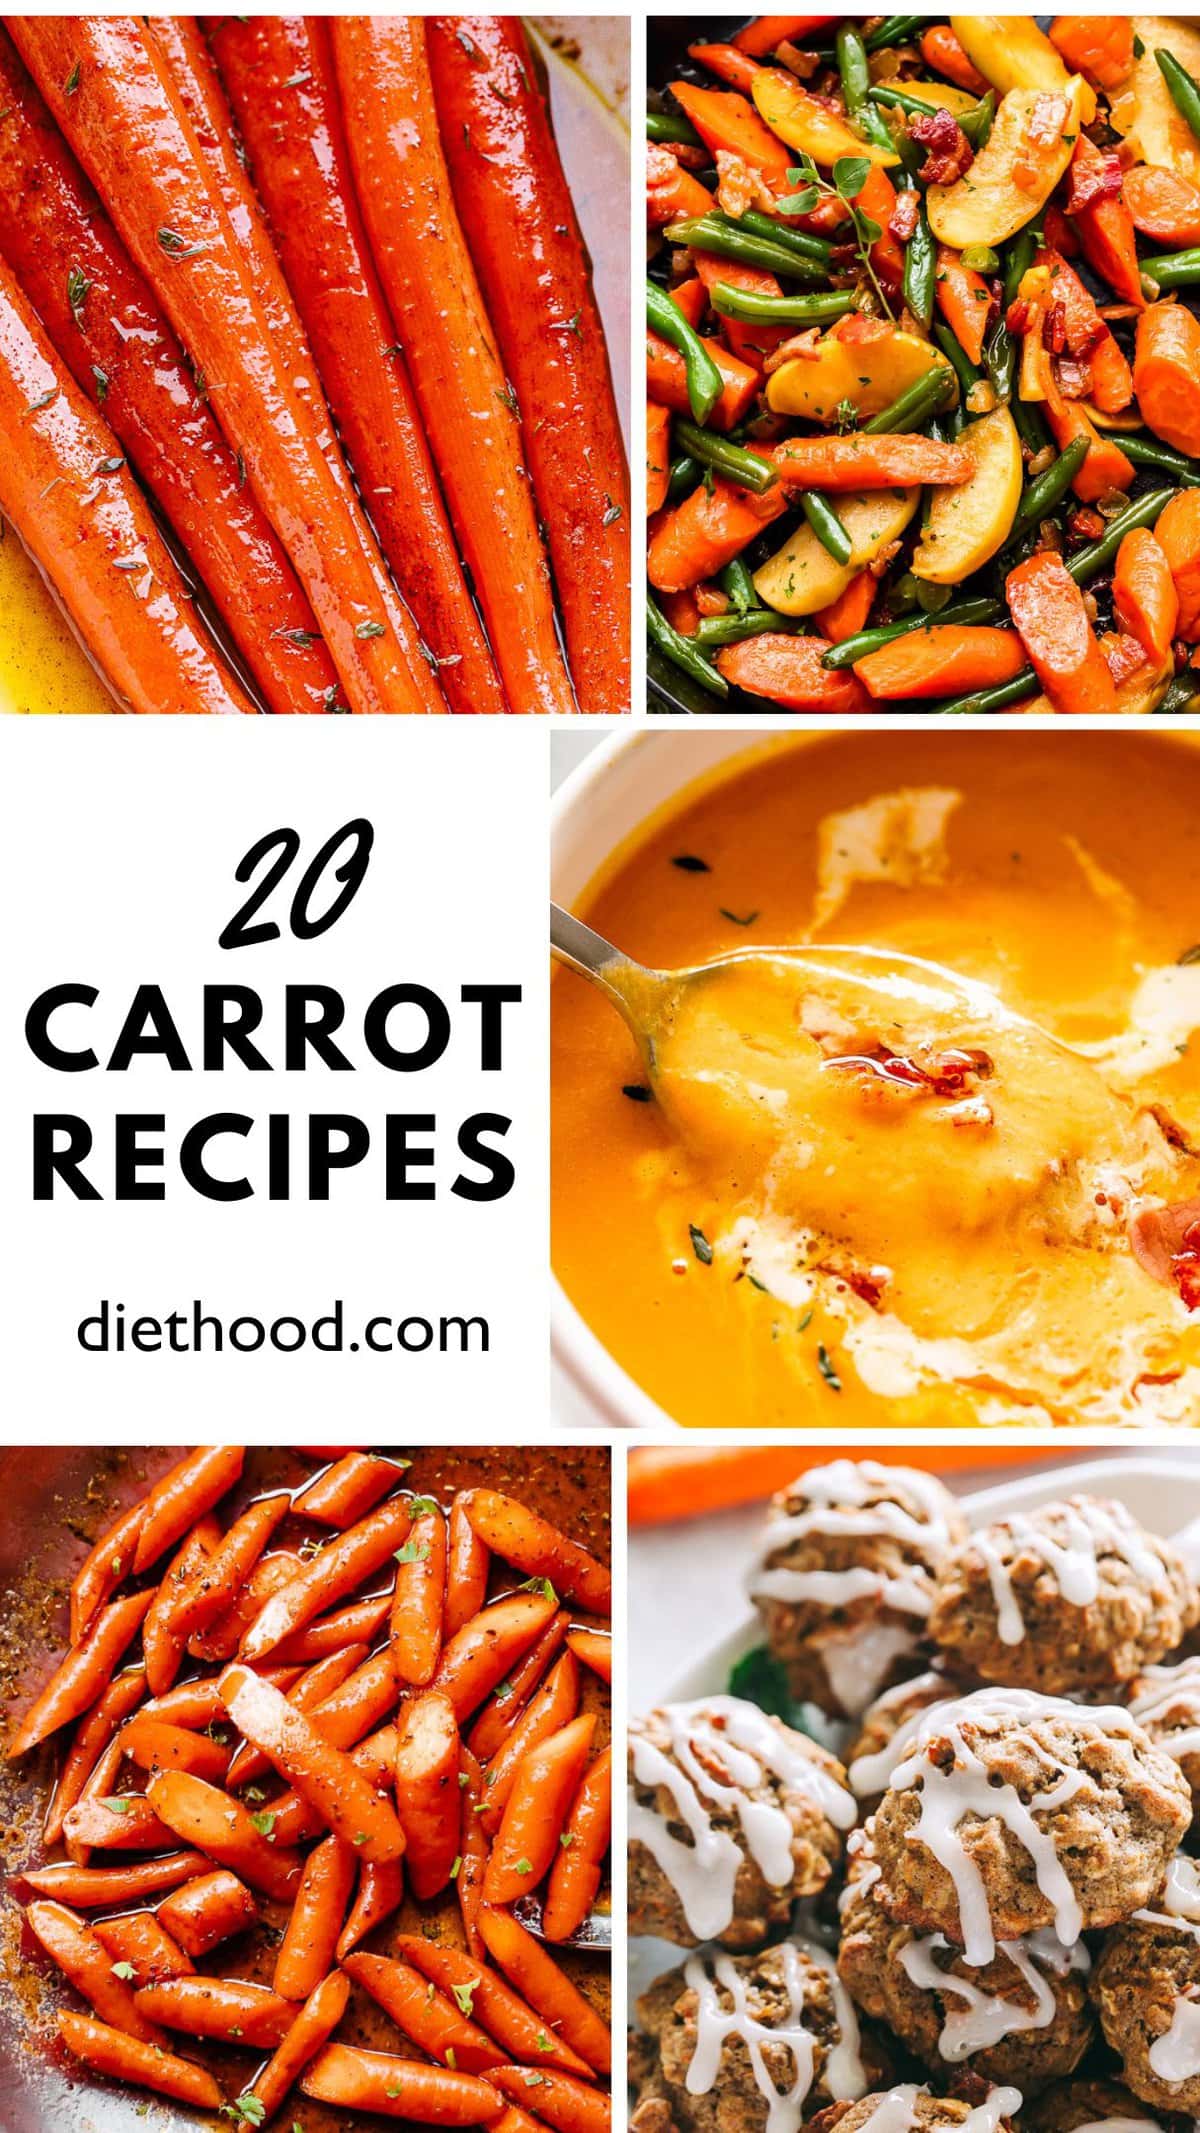 Carrot recipes collage